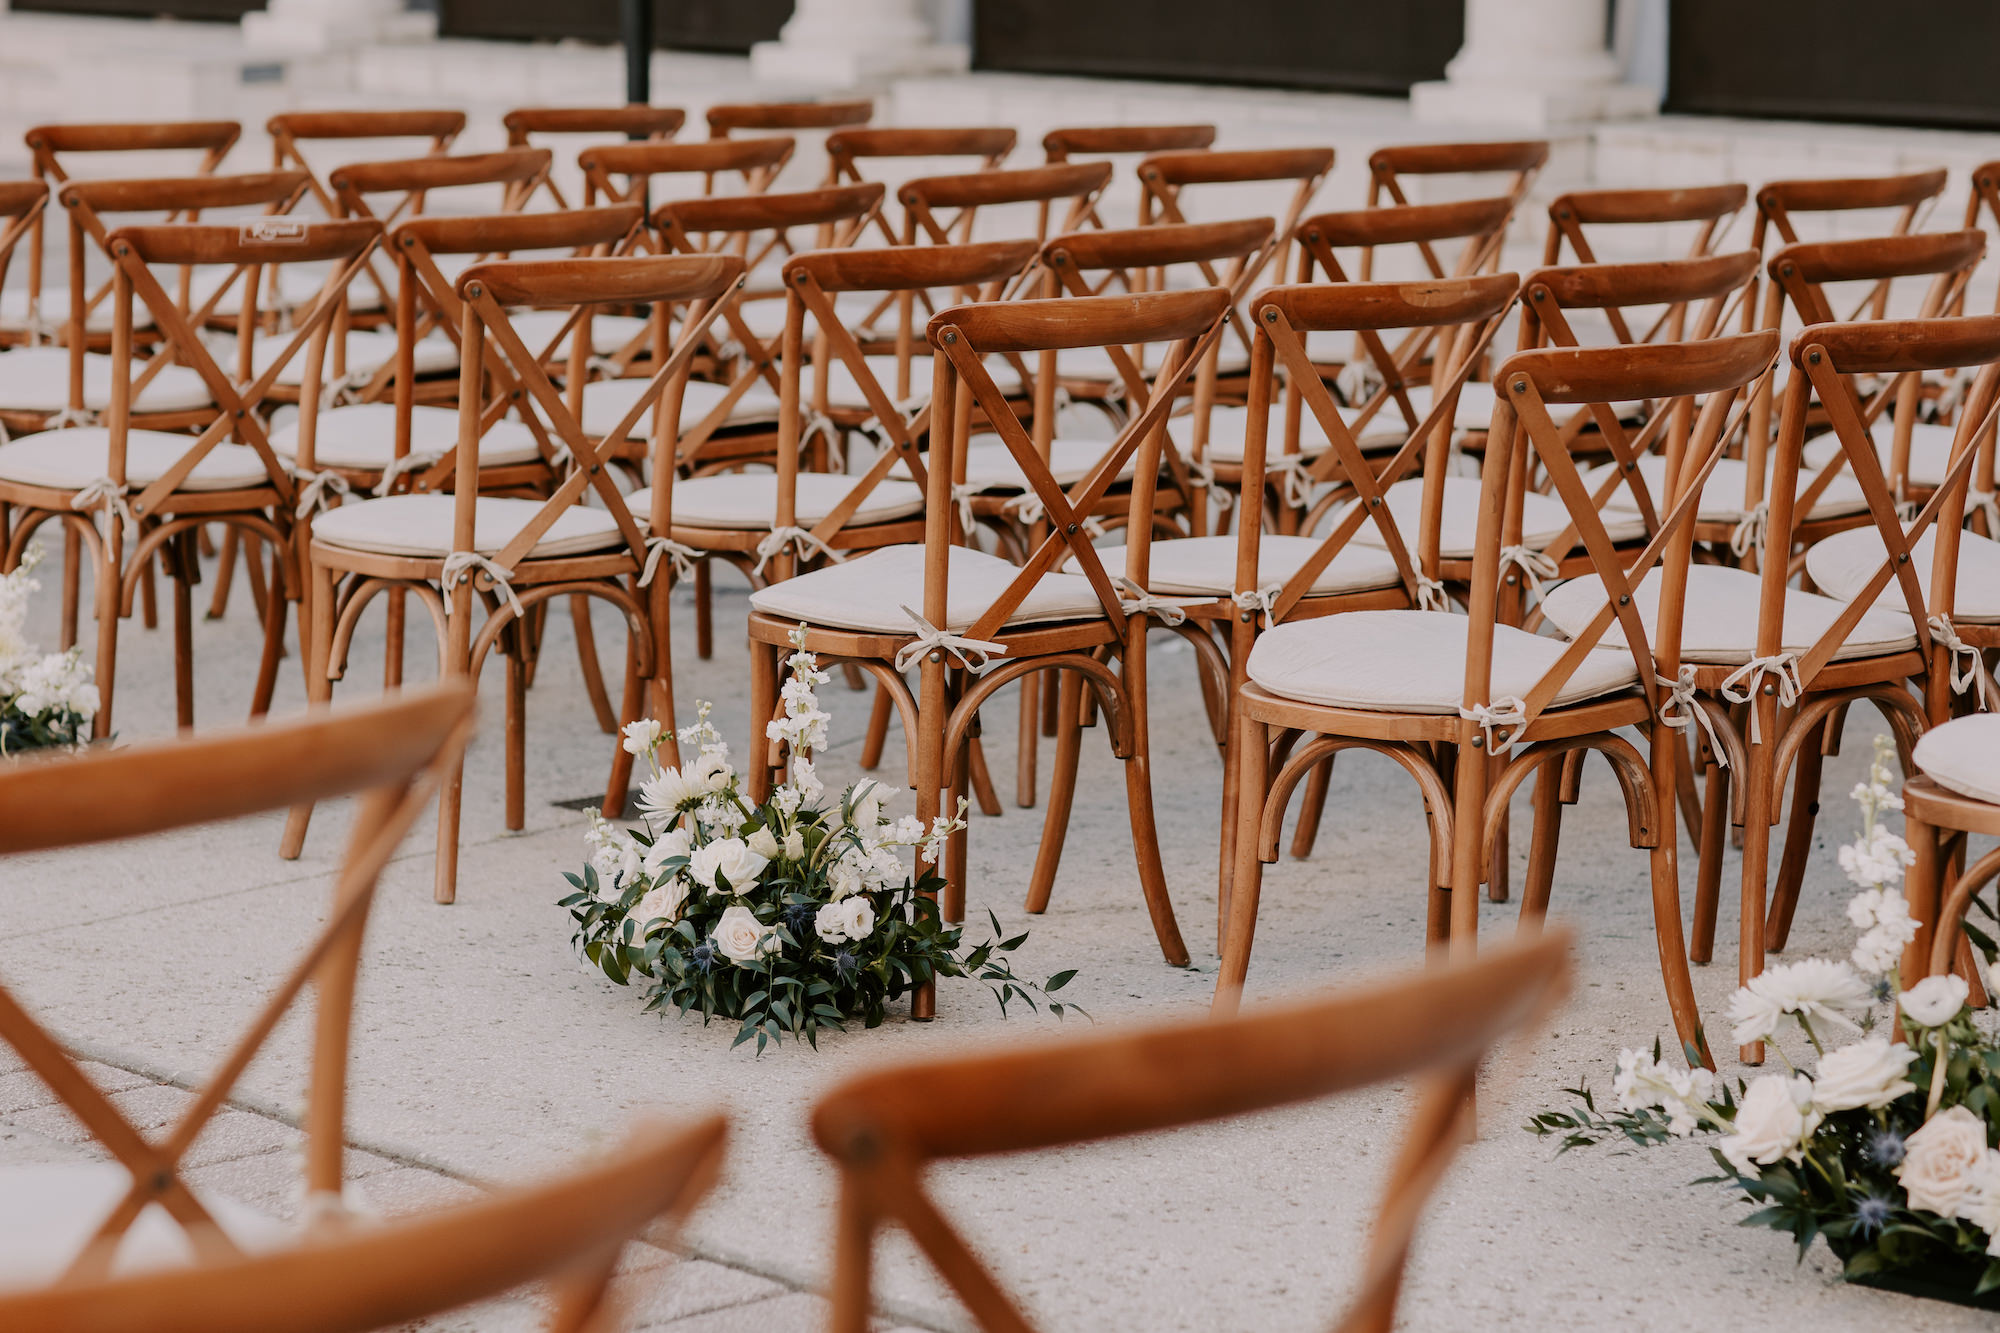 Romantic Wedding Ceremony Aisle Floral Decor Inspiration with Crossback Wooden Chairs